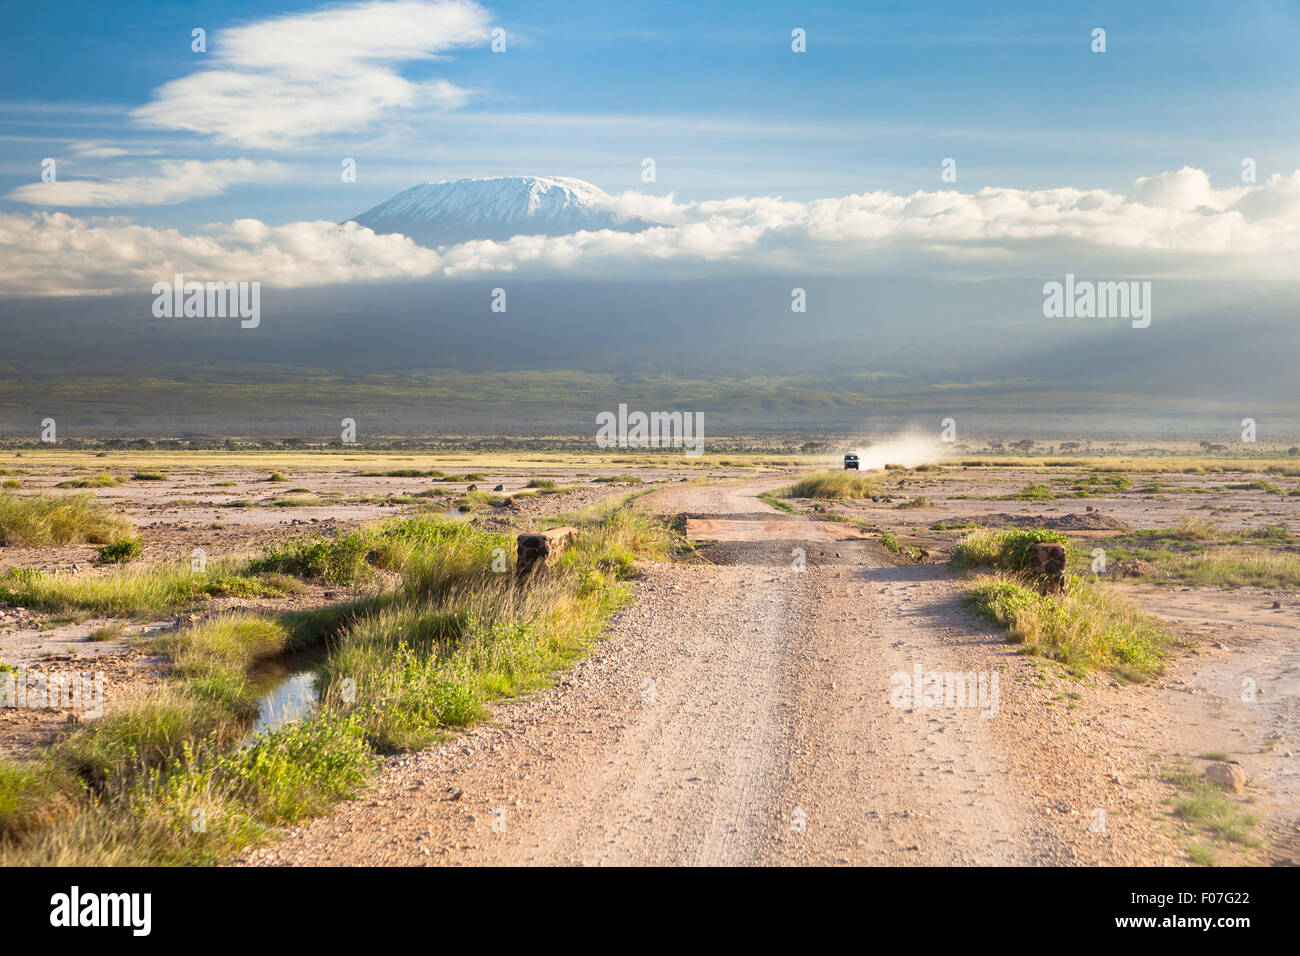 Kilimanjaro with snow cap seen from Amboseli National Park in Kenya with a road in the foreground. Stock Photo